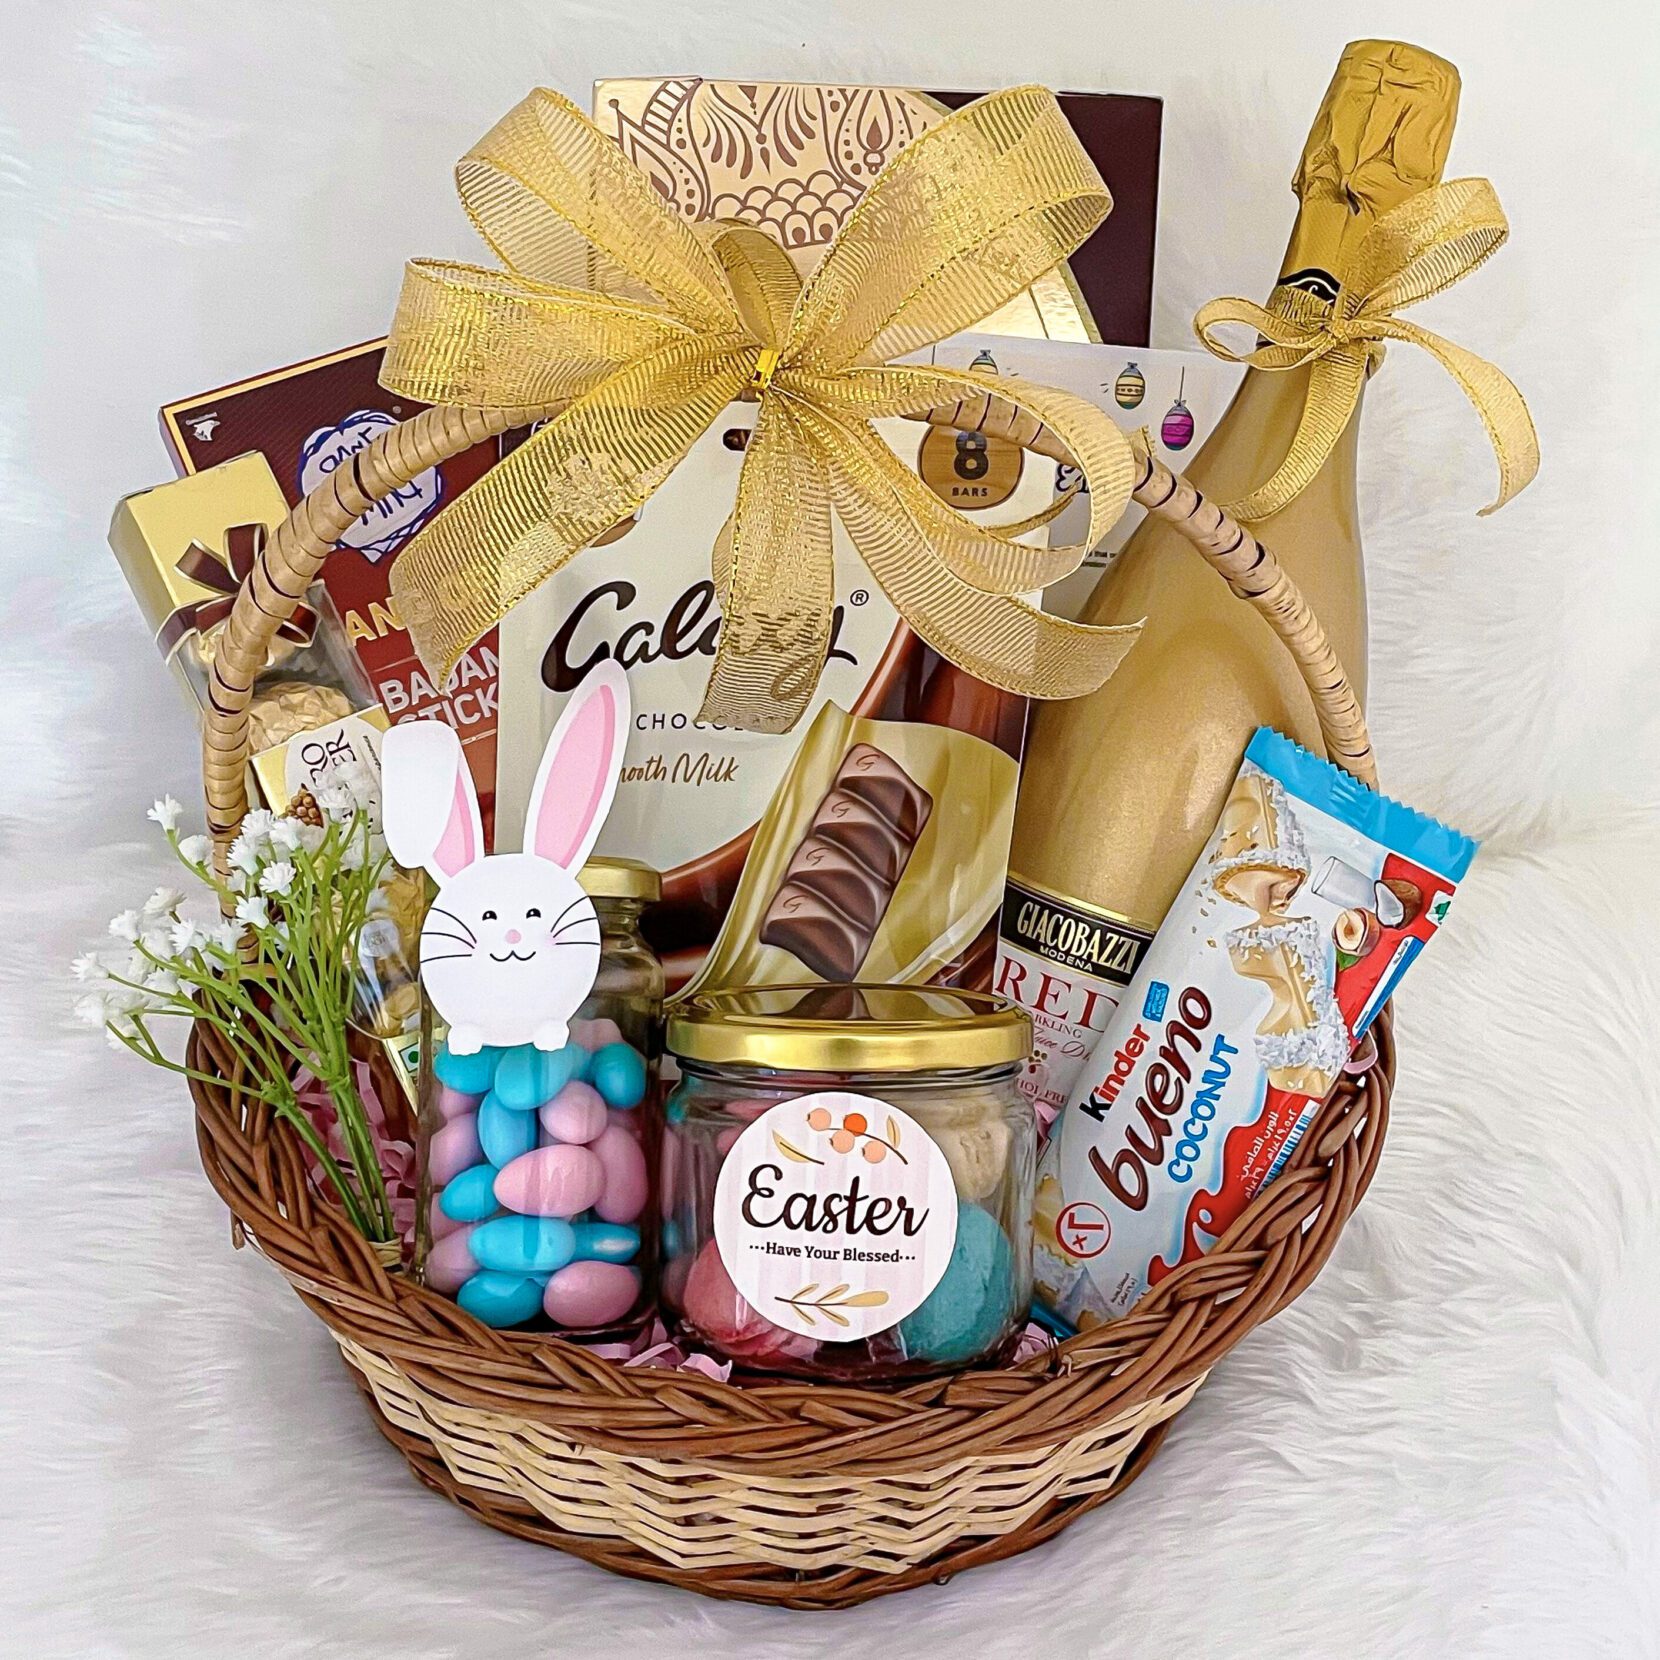 Holiday Relish Easter gift baskets With Easter Eggs, Wine, Fruit Jam, And More